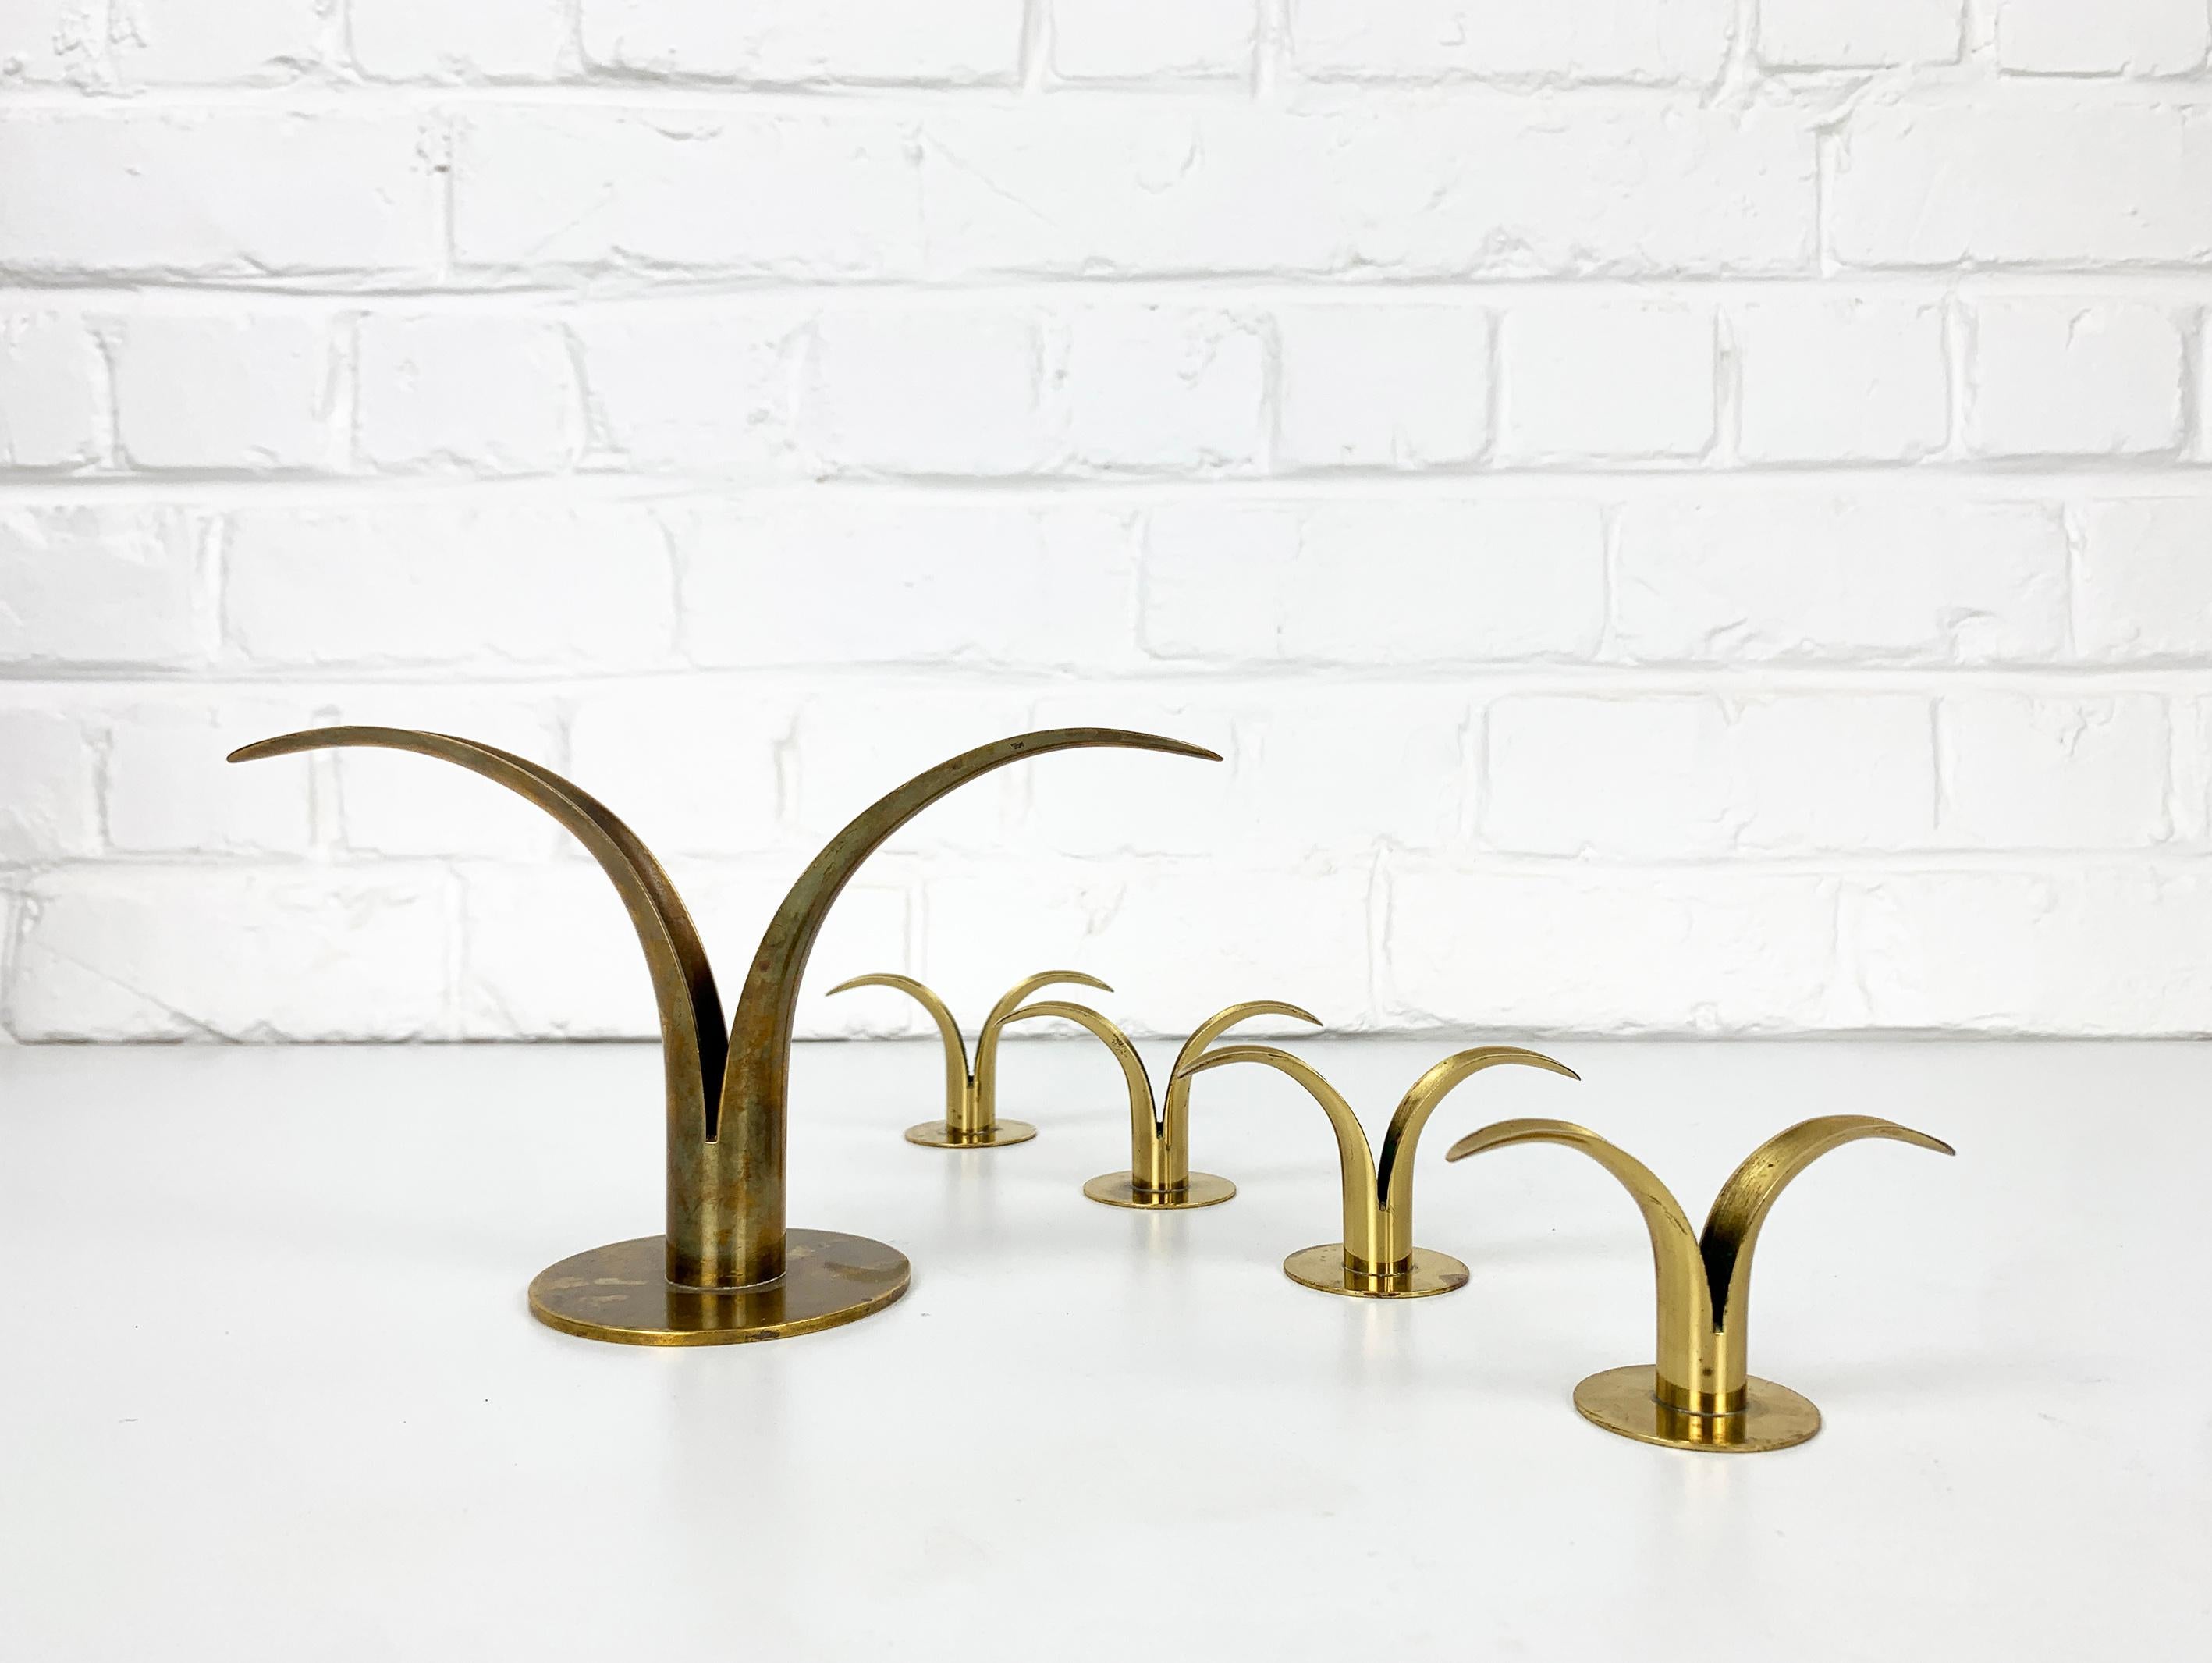 4 Small Mid-Century Brass Model Lily Candleholders from Lbe Konst, Ystad, Sweden For Sale 6